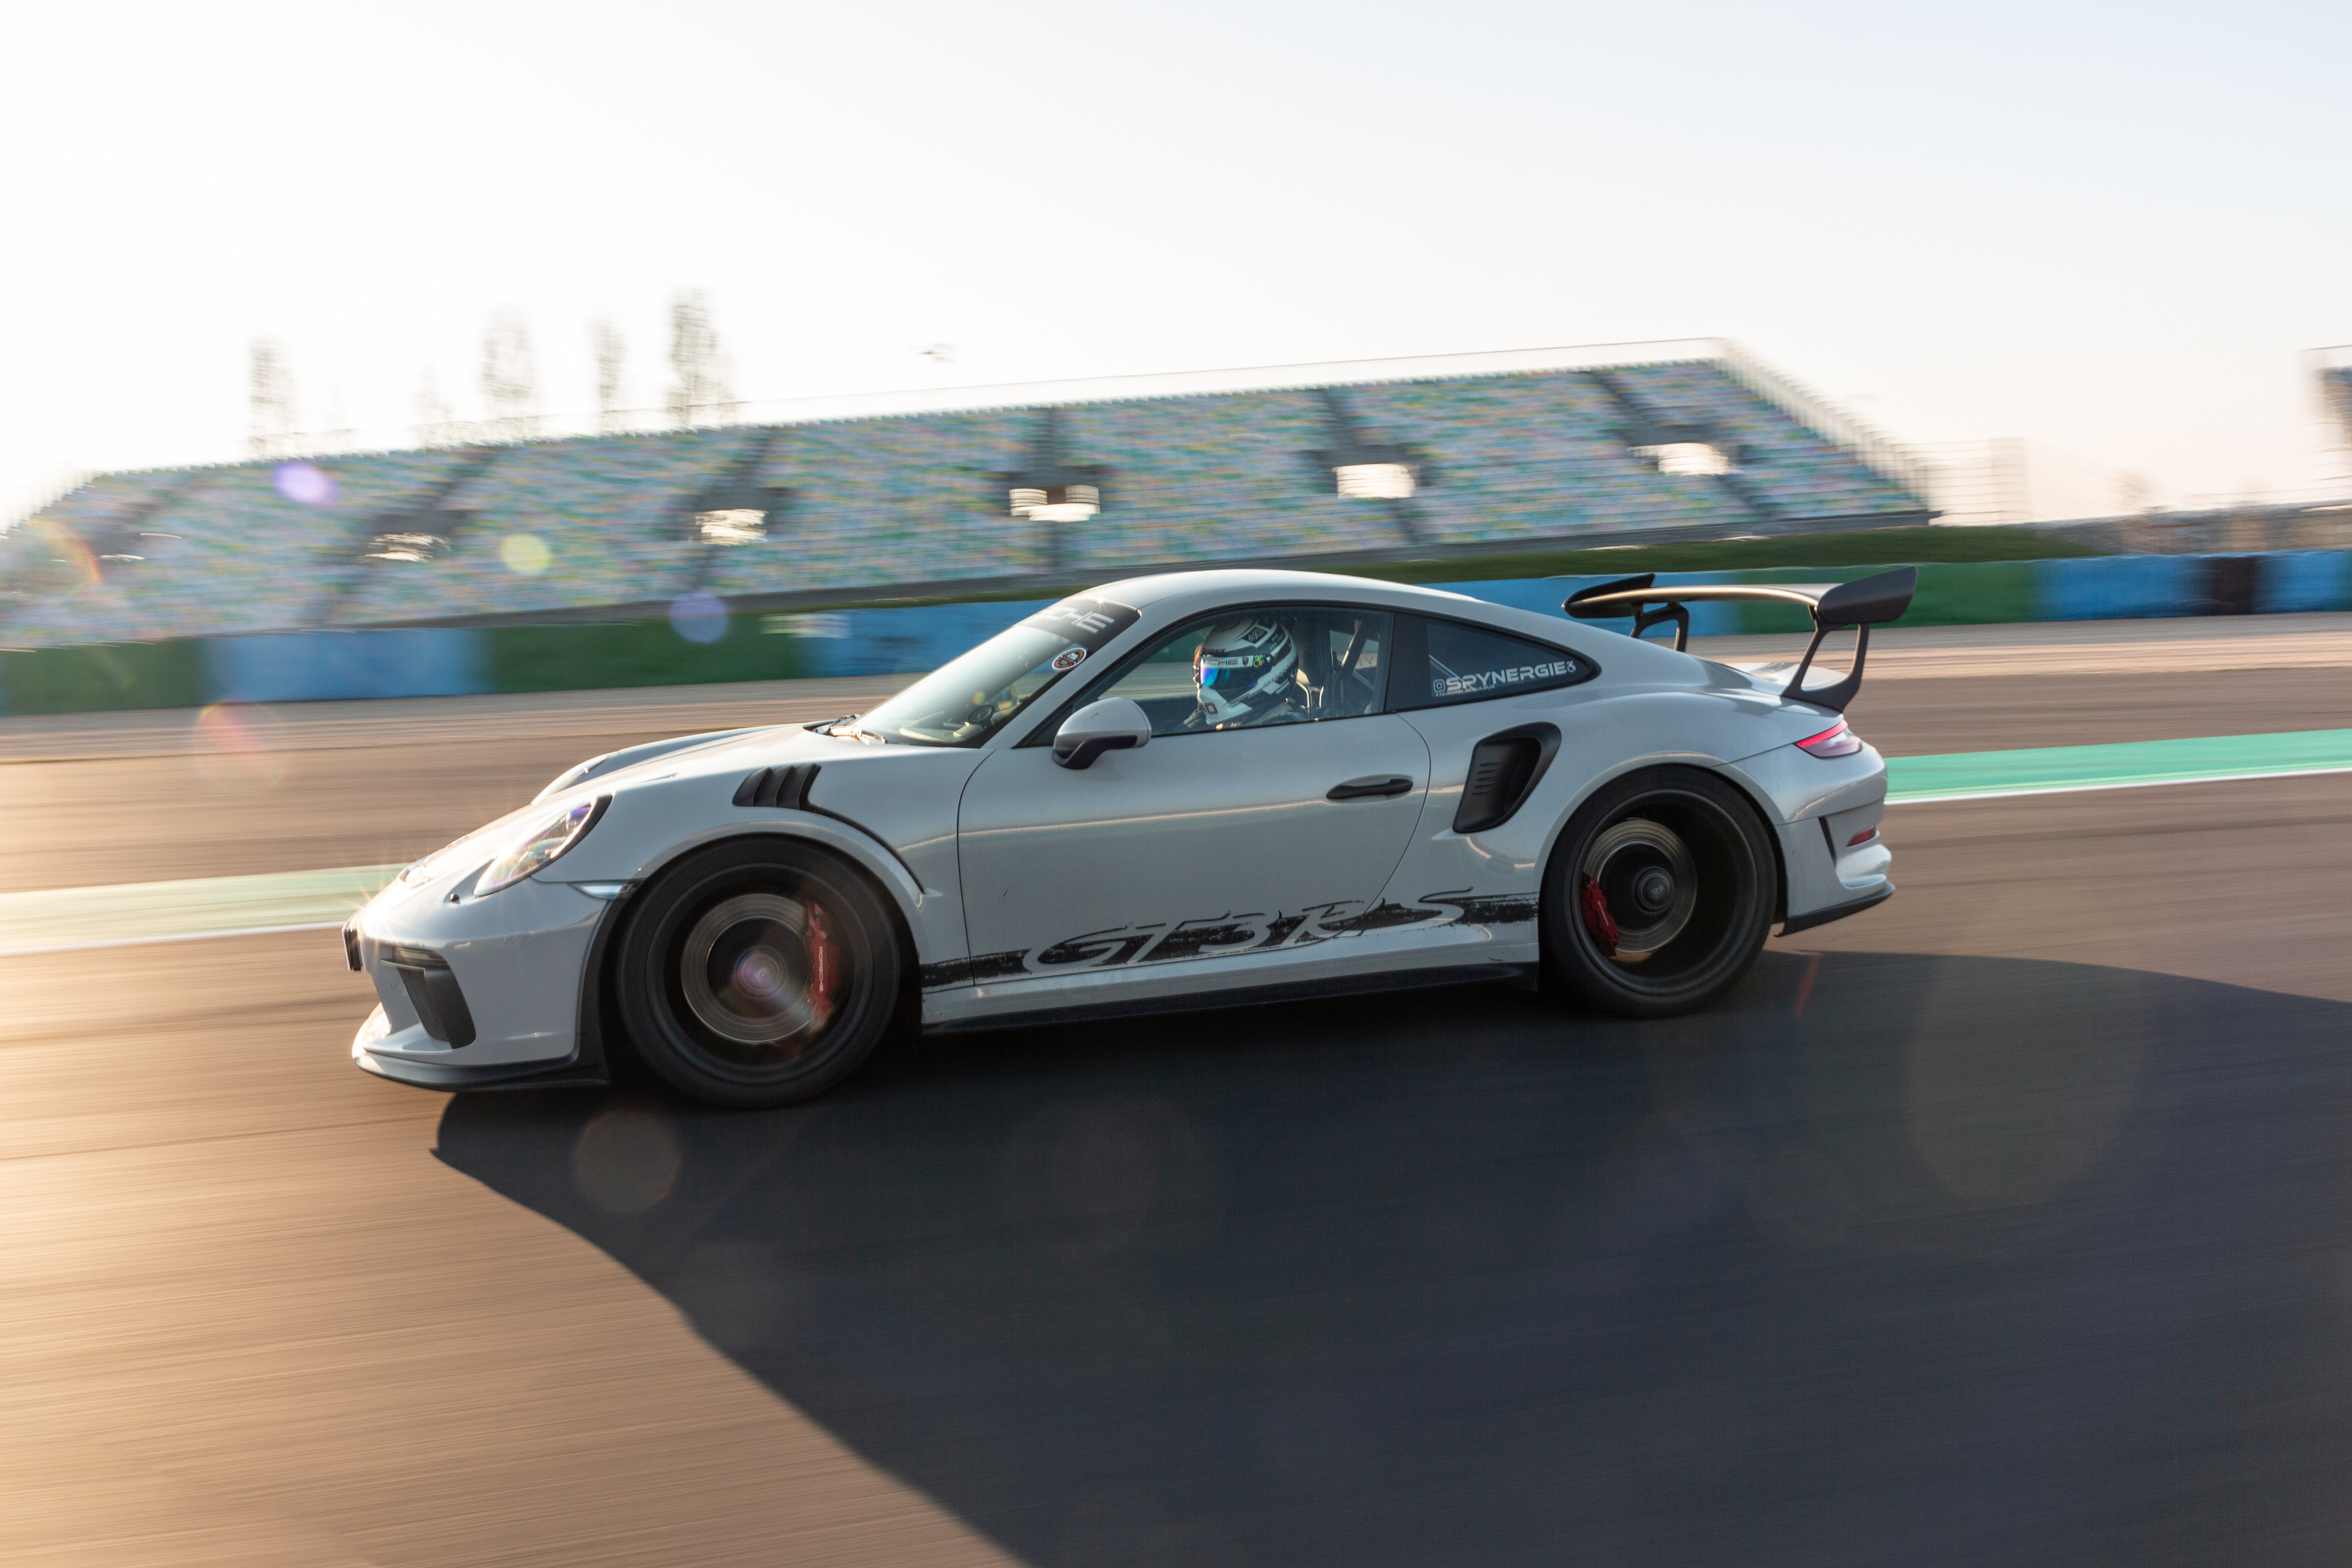 Porsche 911 GT3 RS on a racing track